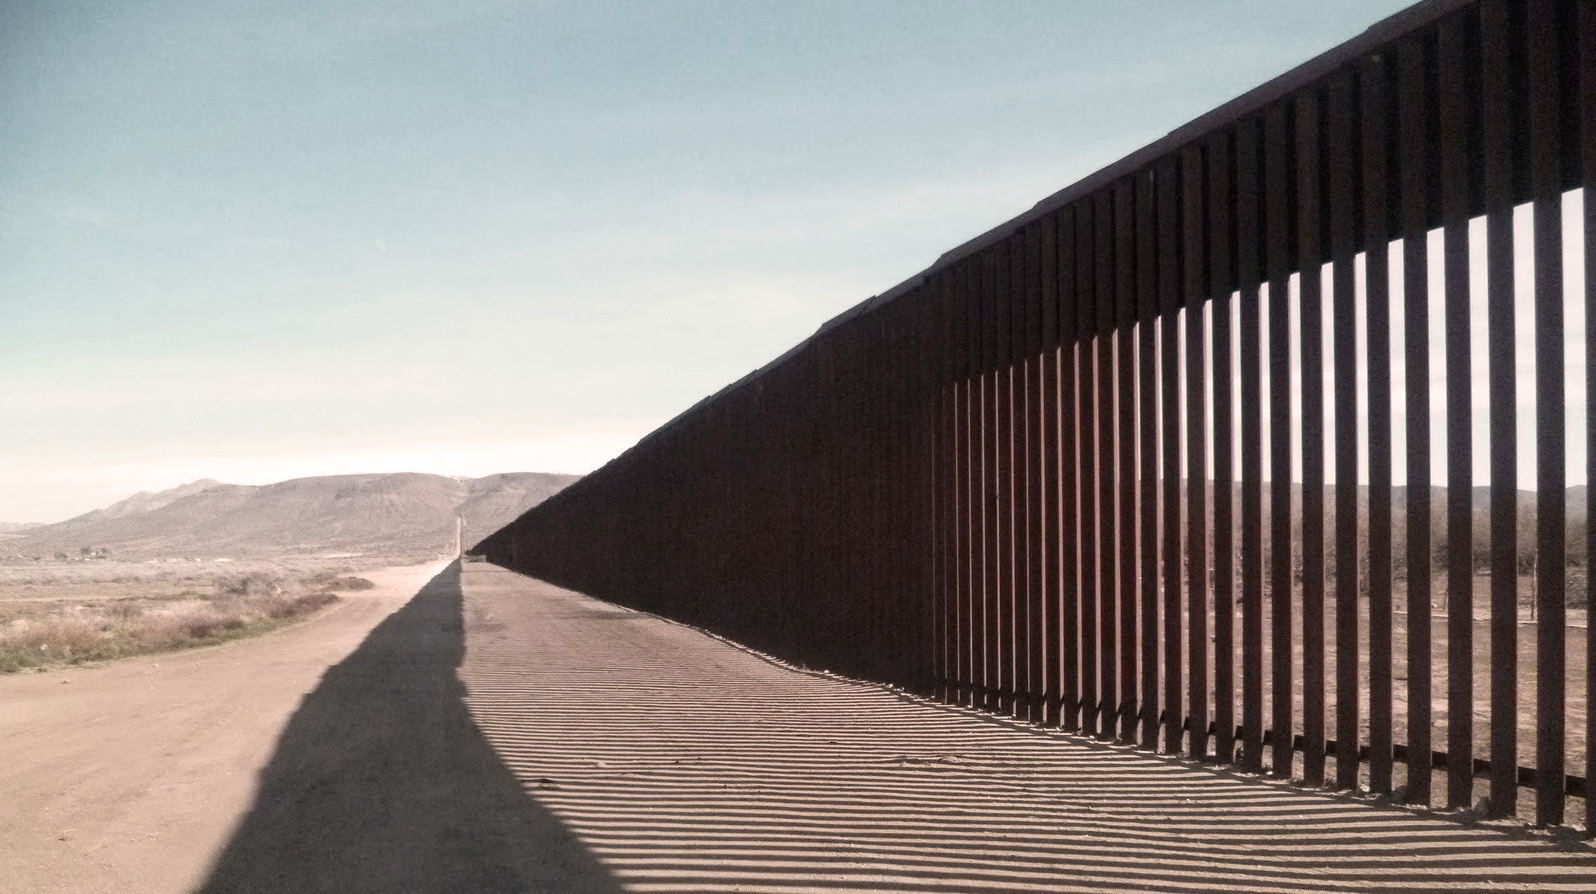 President’s Plan for Border Security Could Make a Bad Situation Worse